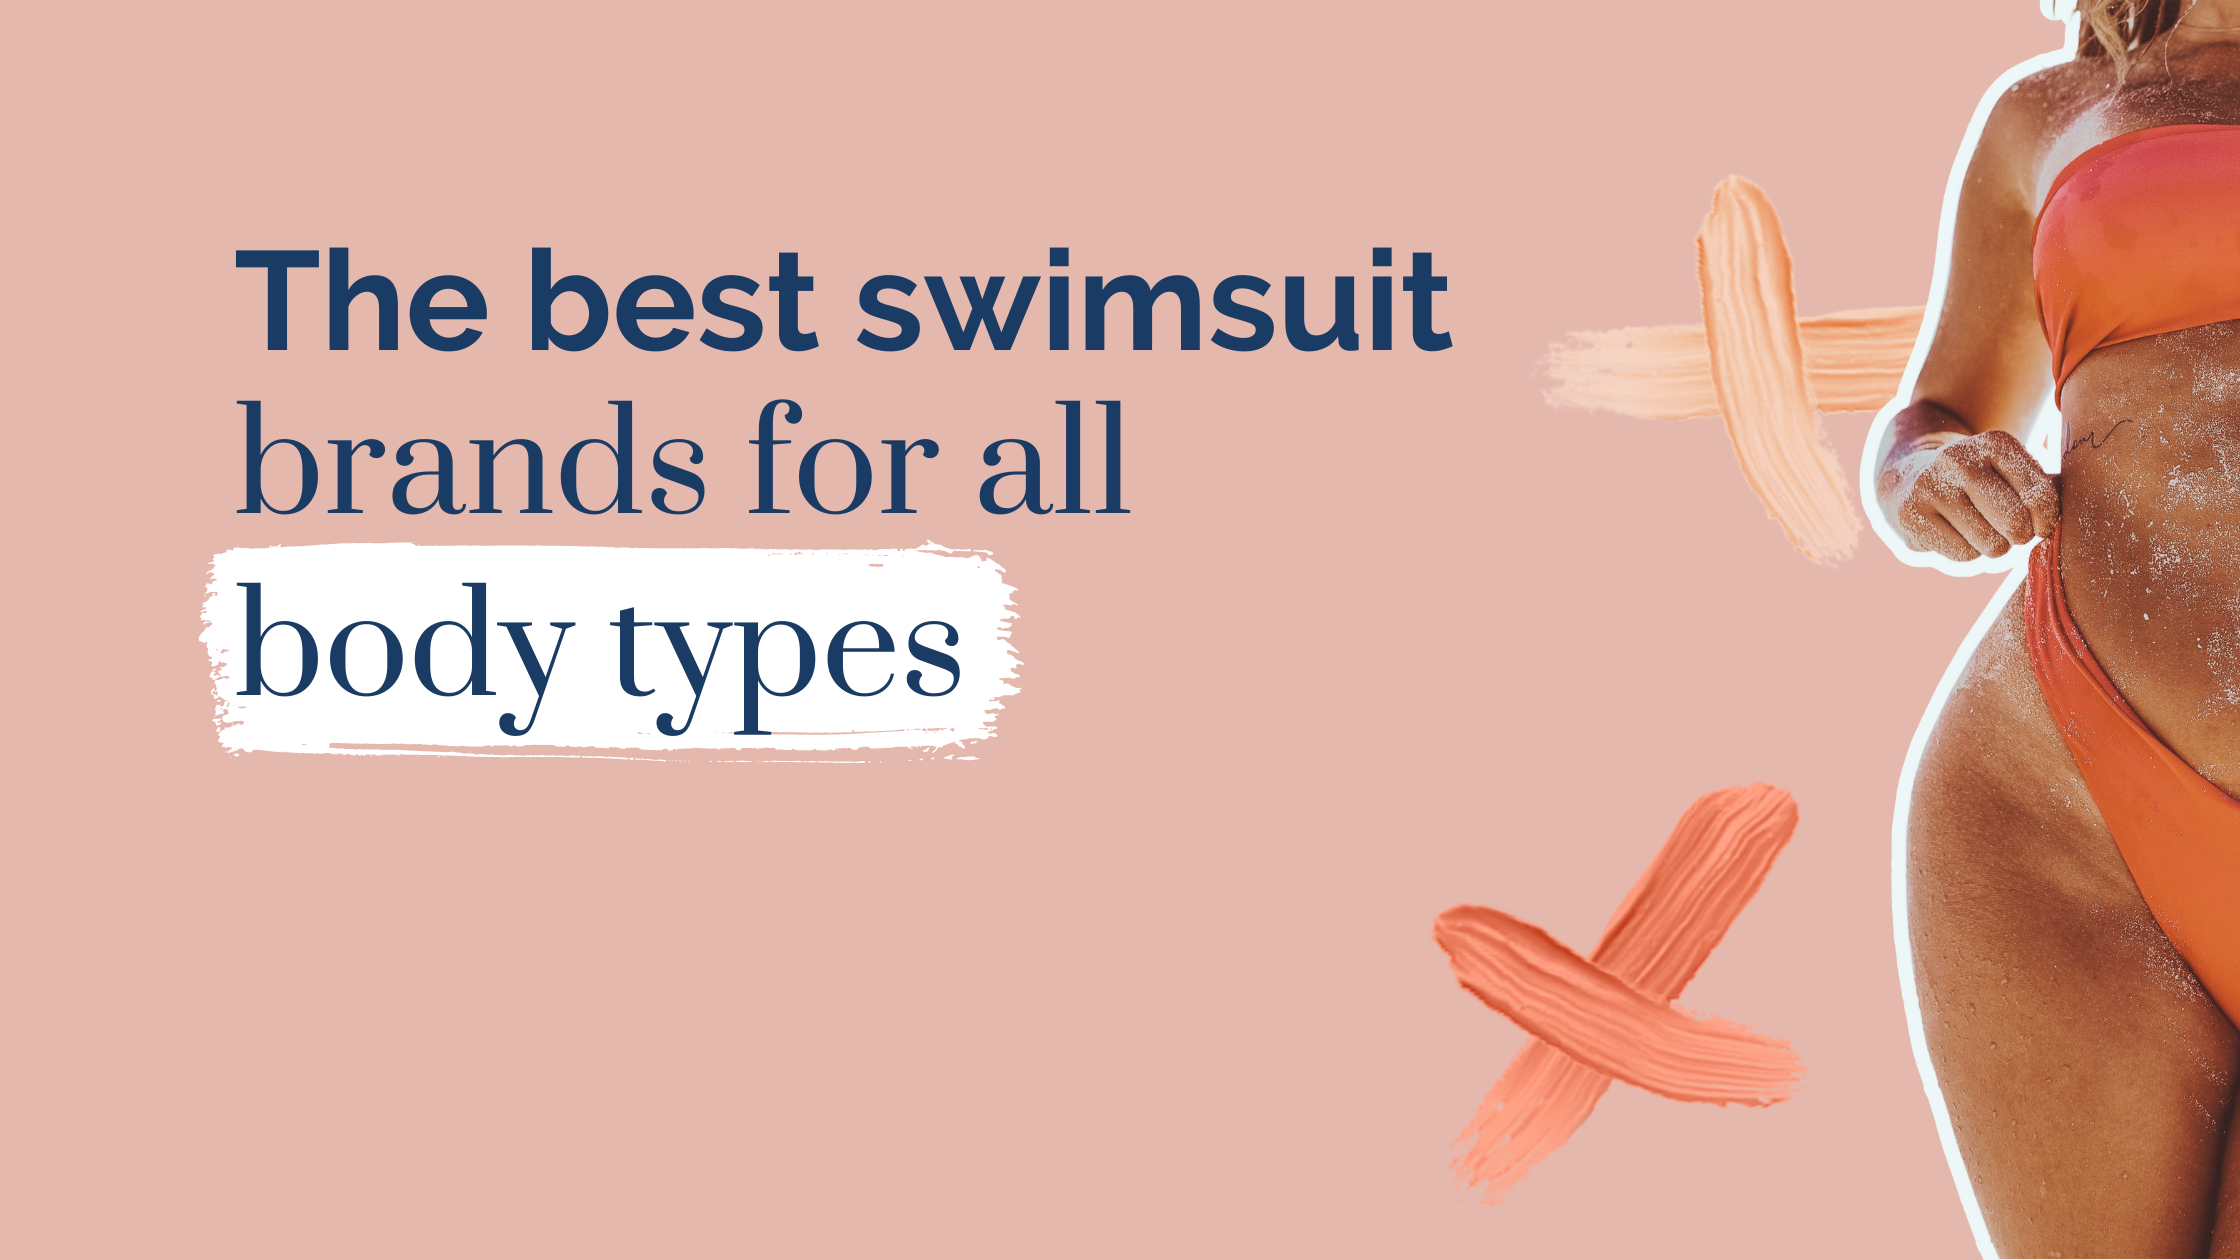 The BEST swimsuit brands for all body types. Image: Unsplash